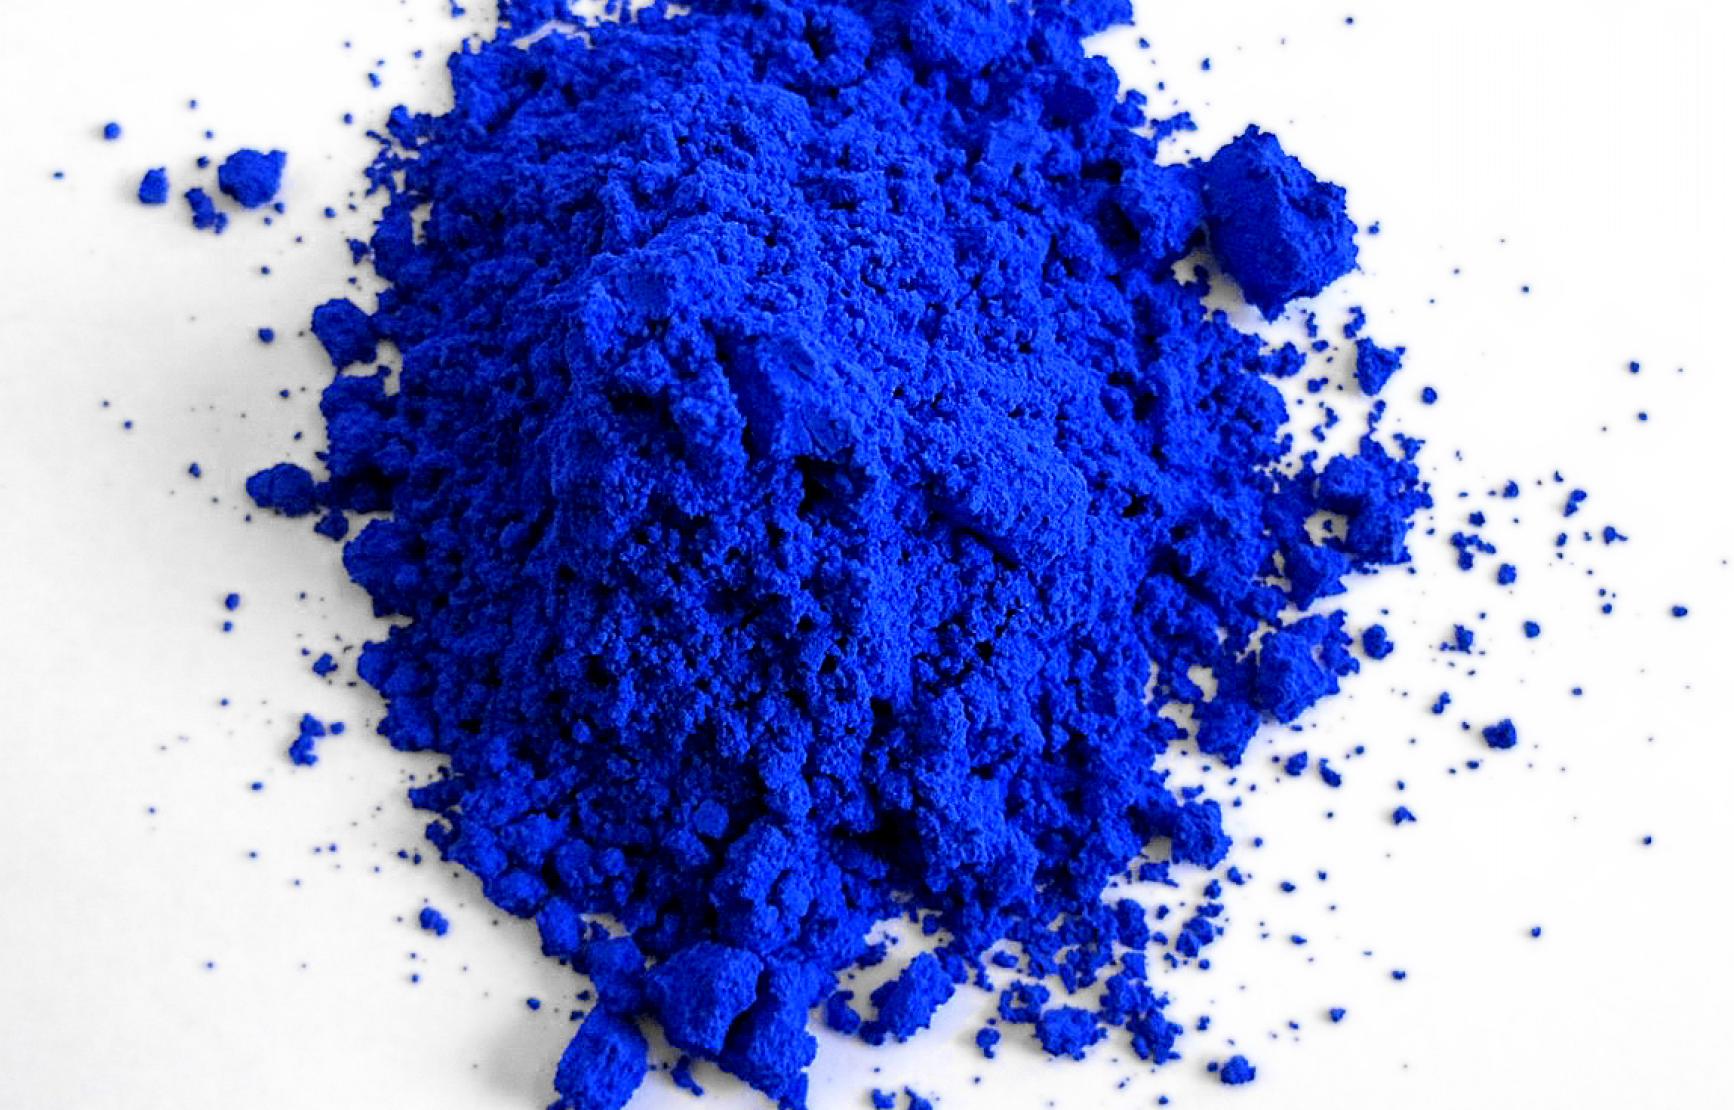 A pile of blue powder on a white table